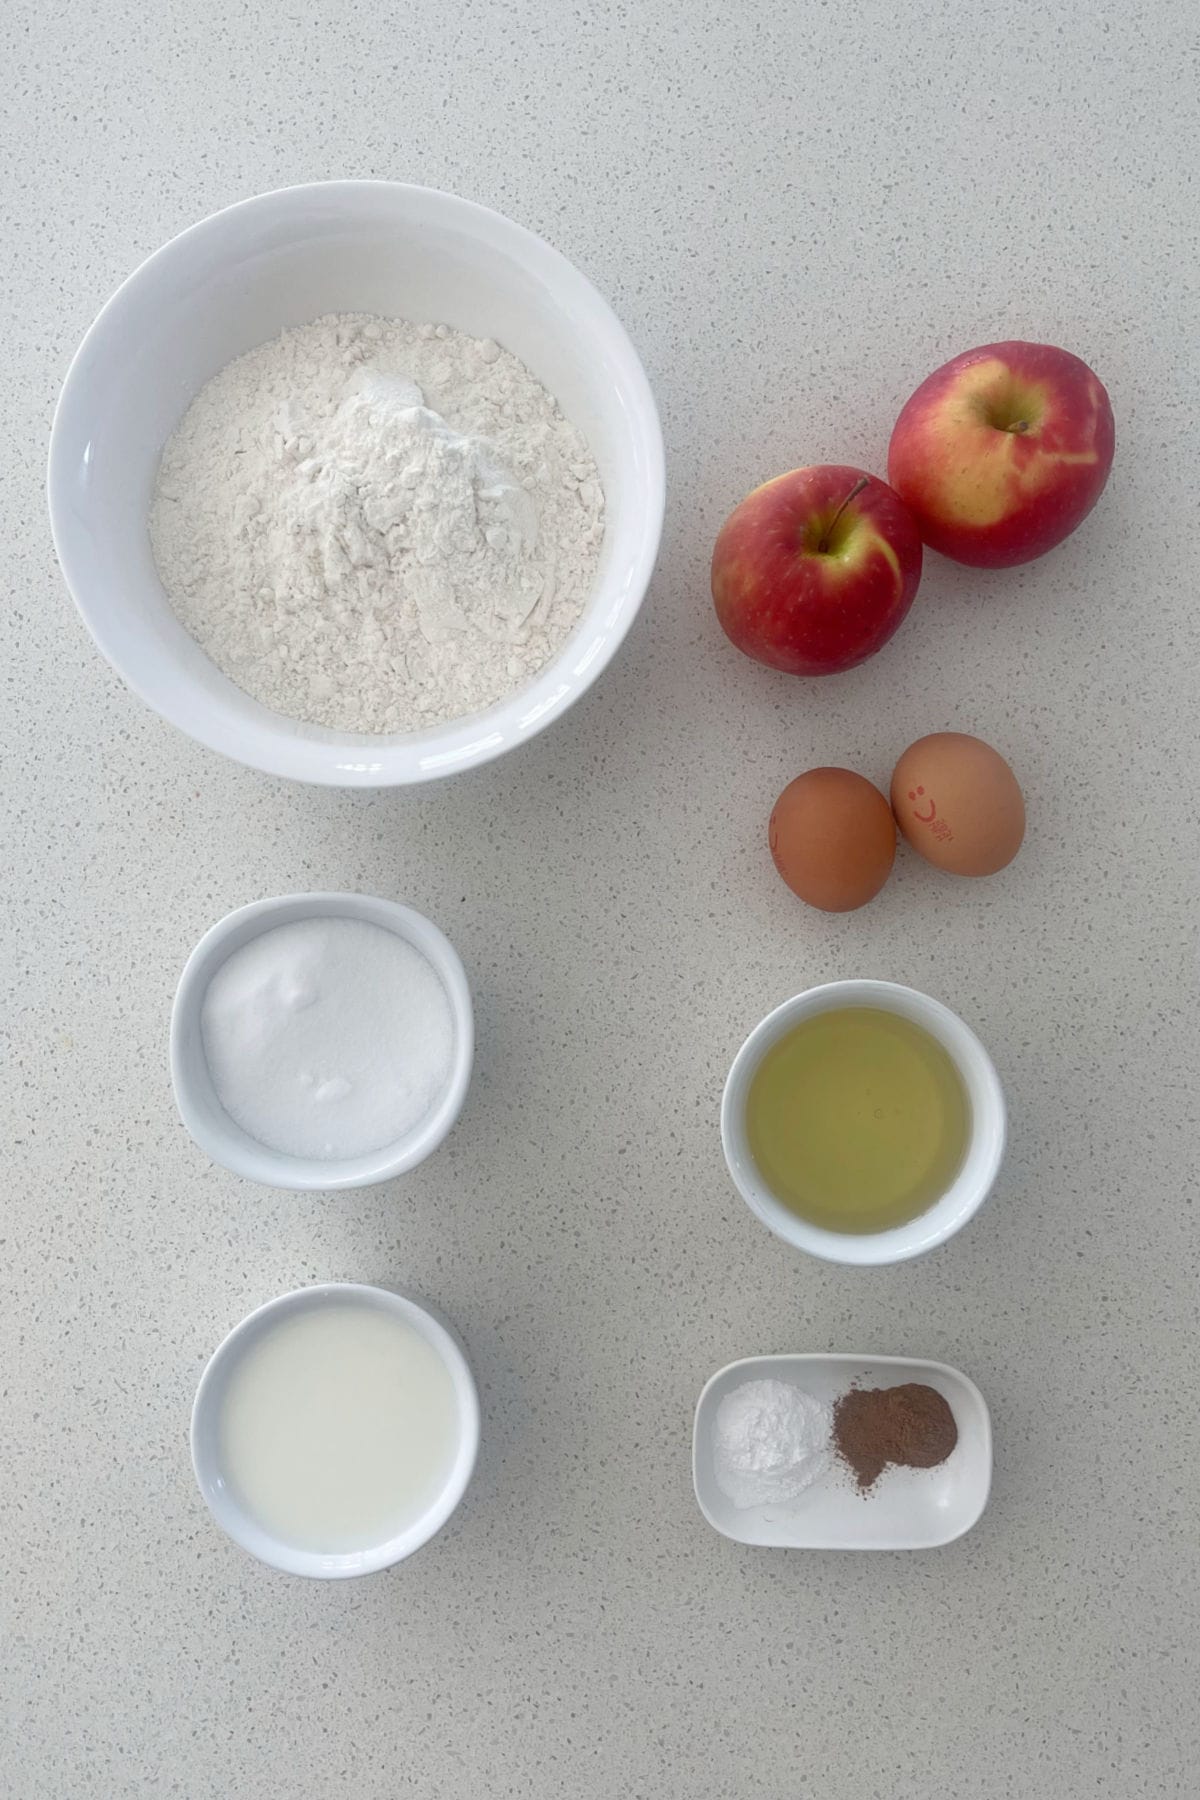 Ingredients for Thermomix Apple Muffins recipe on a white speckled bench.